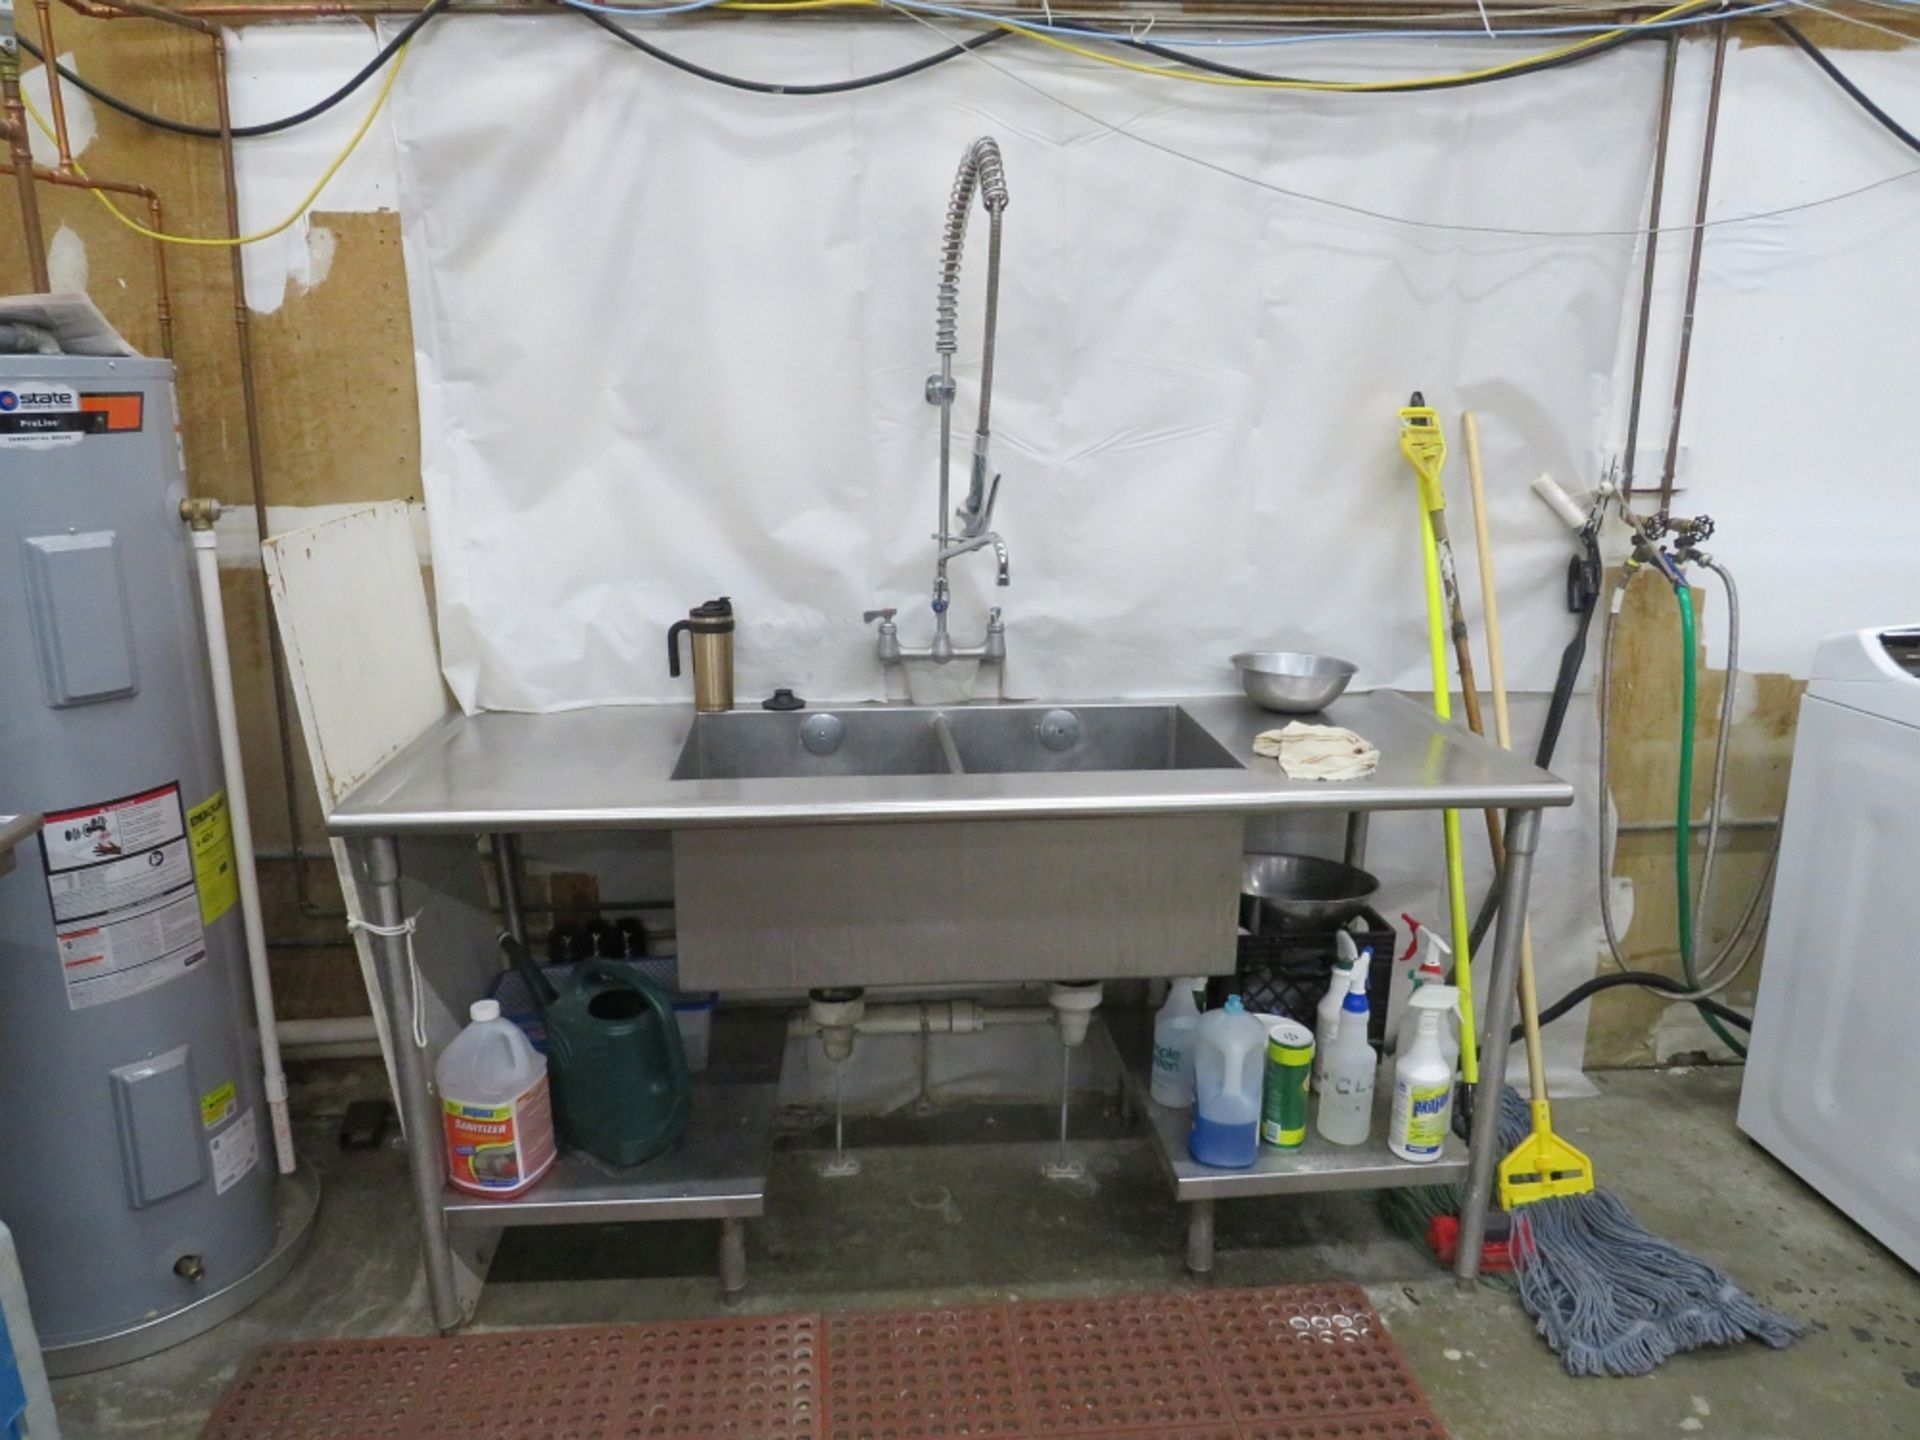 COMMERCIAL STAINLESS STEEL SINK W/ SPRAYER, 5'